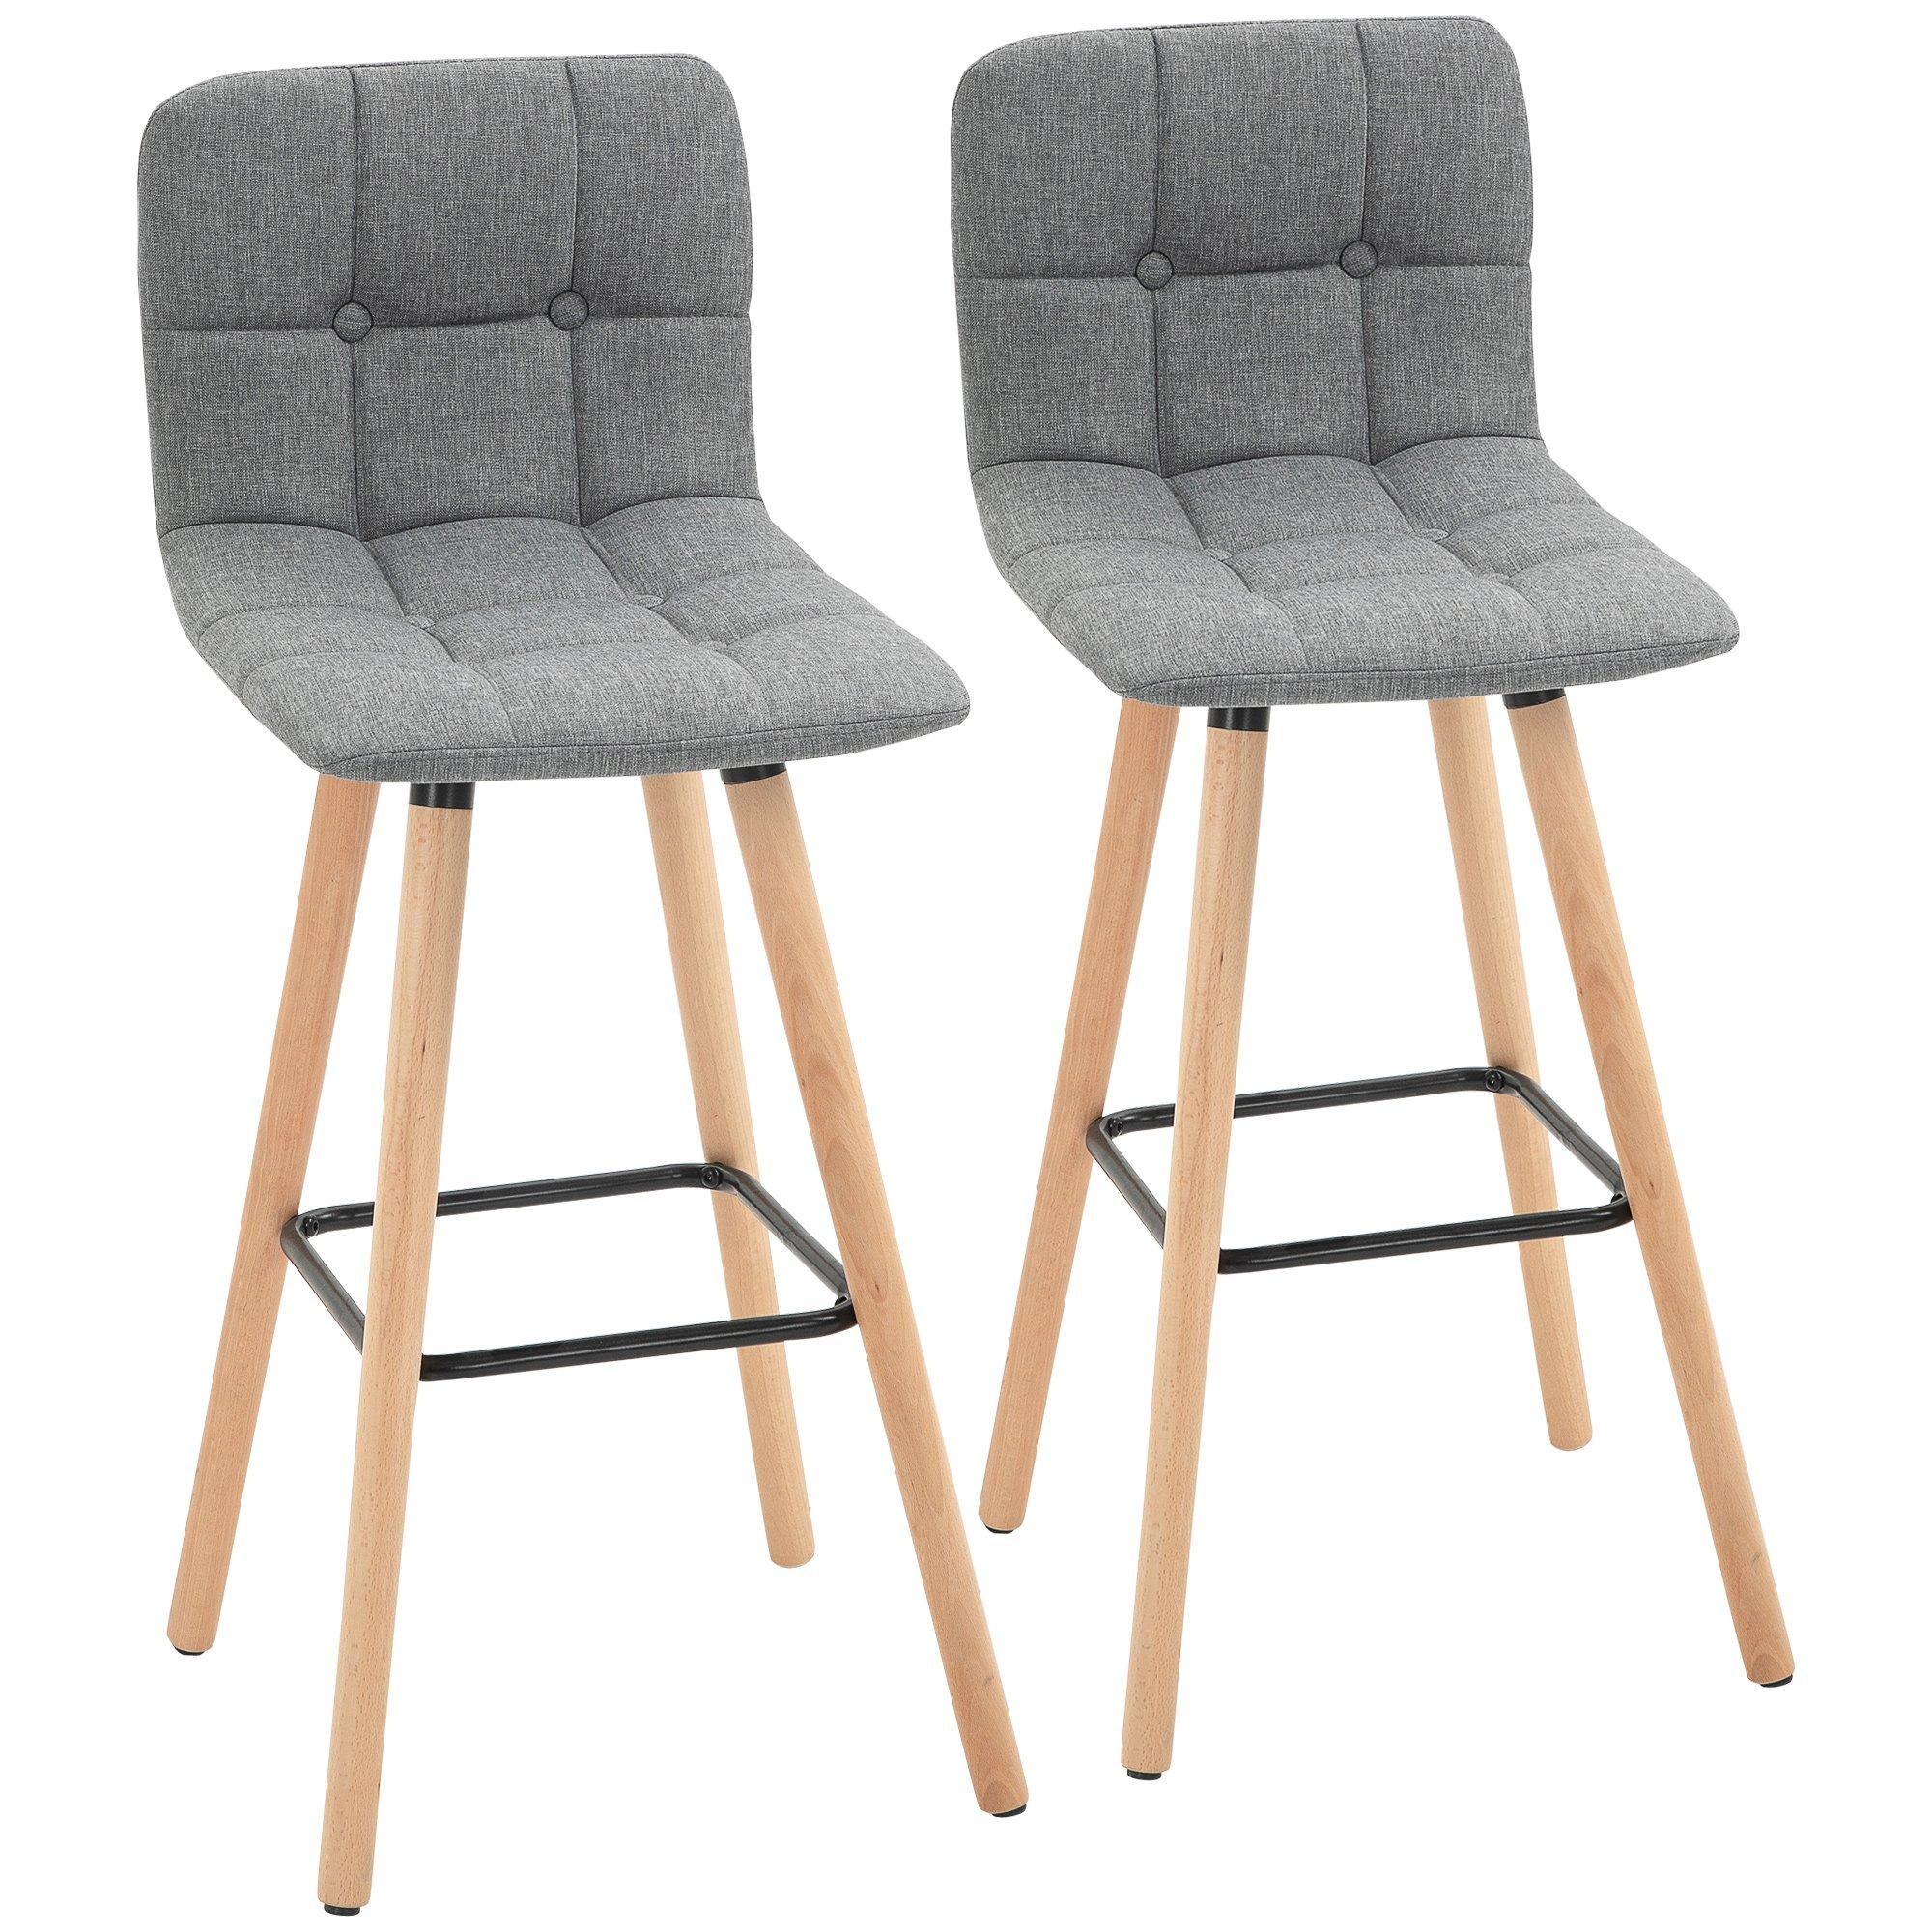 Bar stool Set of 2 Armless Button Tufted Counter Chairs Wood Legs